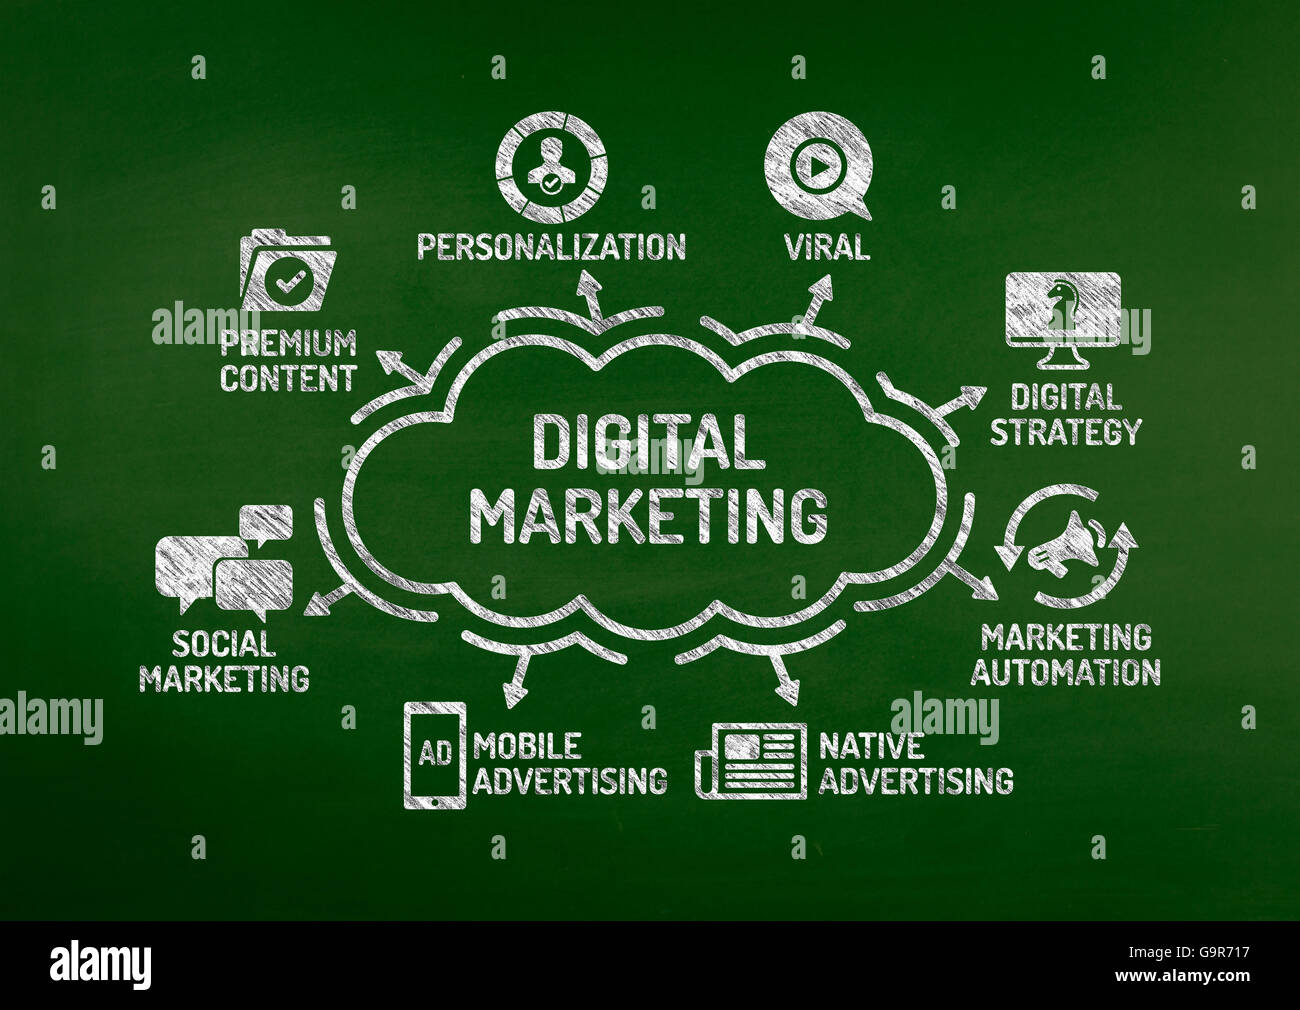 Digital Marketing Chart with keywords and icons on blackboard Stock Photo